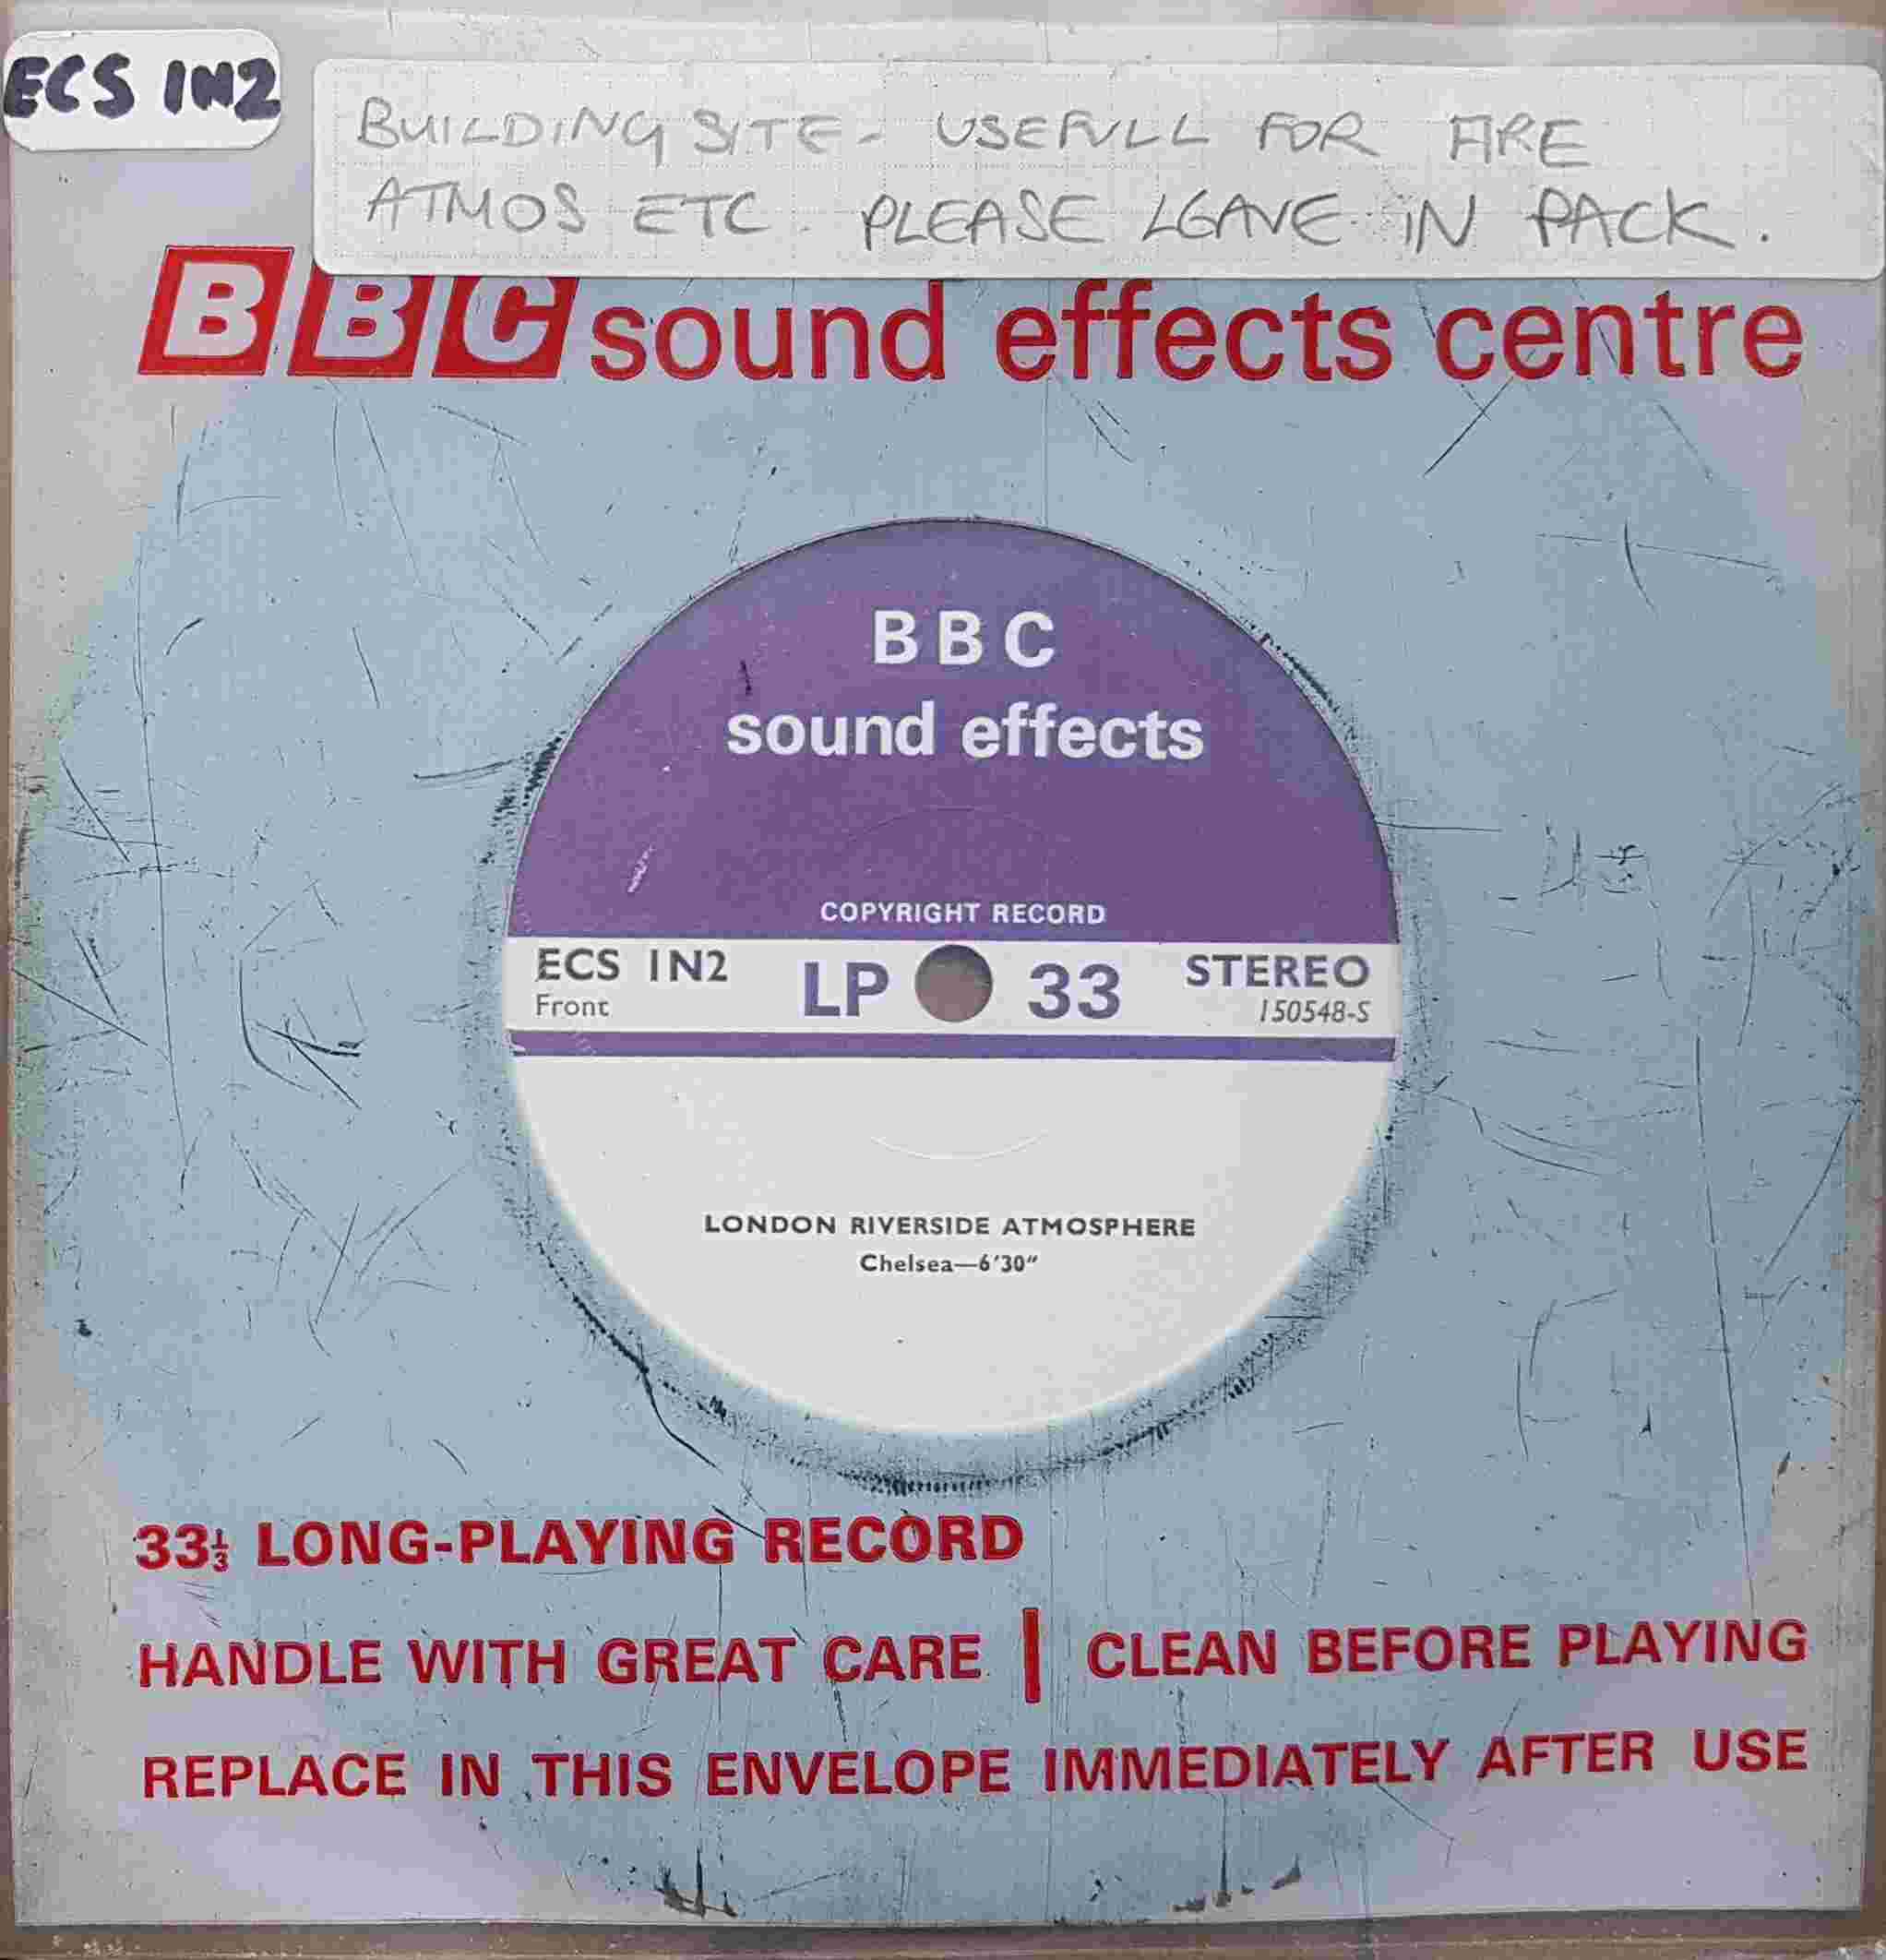 Picture of ECS 1N2 London Riverside atmosphere - Chelsea / Building site atmosphere by artist Not registered from the BBC singles - Records and Tapes library